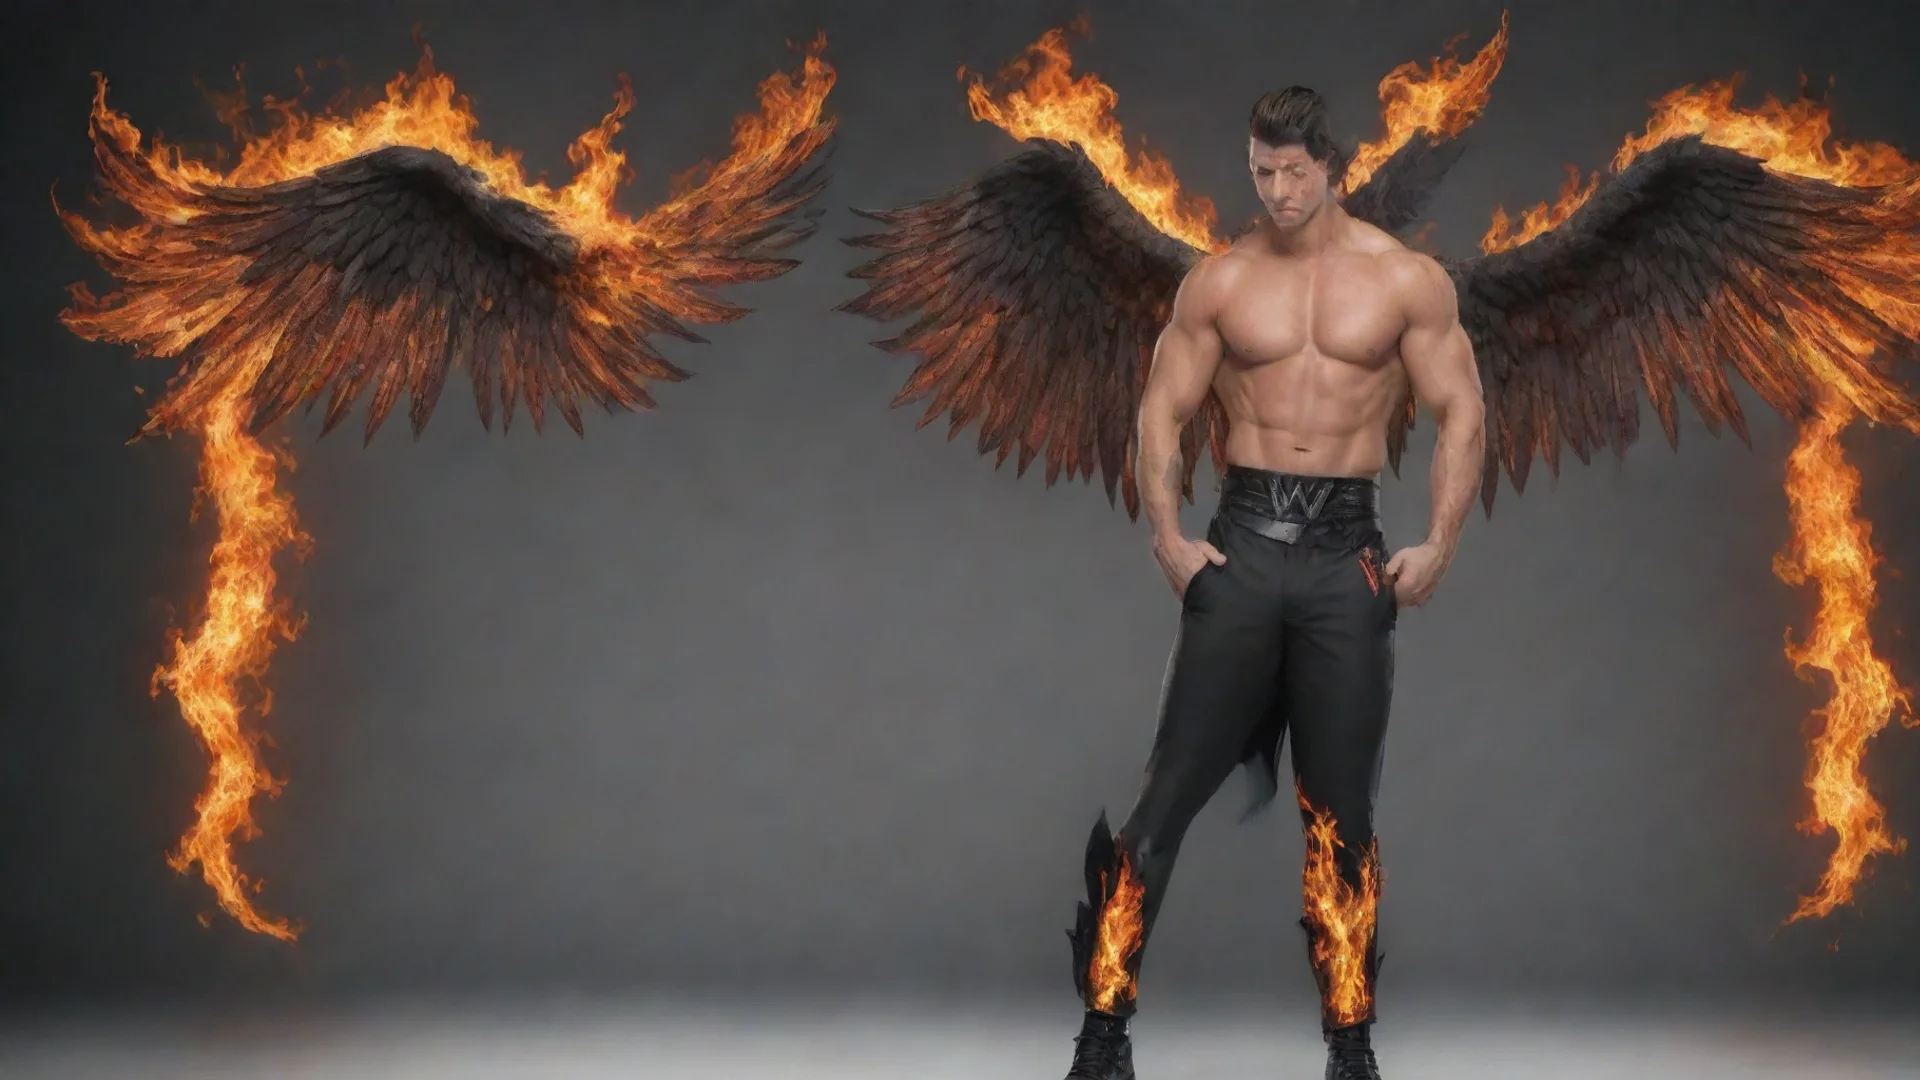 aiartstation art wwe male attire with fire and wings on the pants confident engaging wow 3 wide